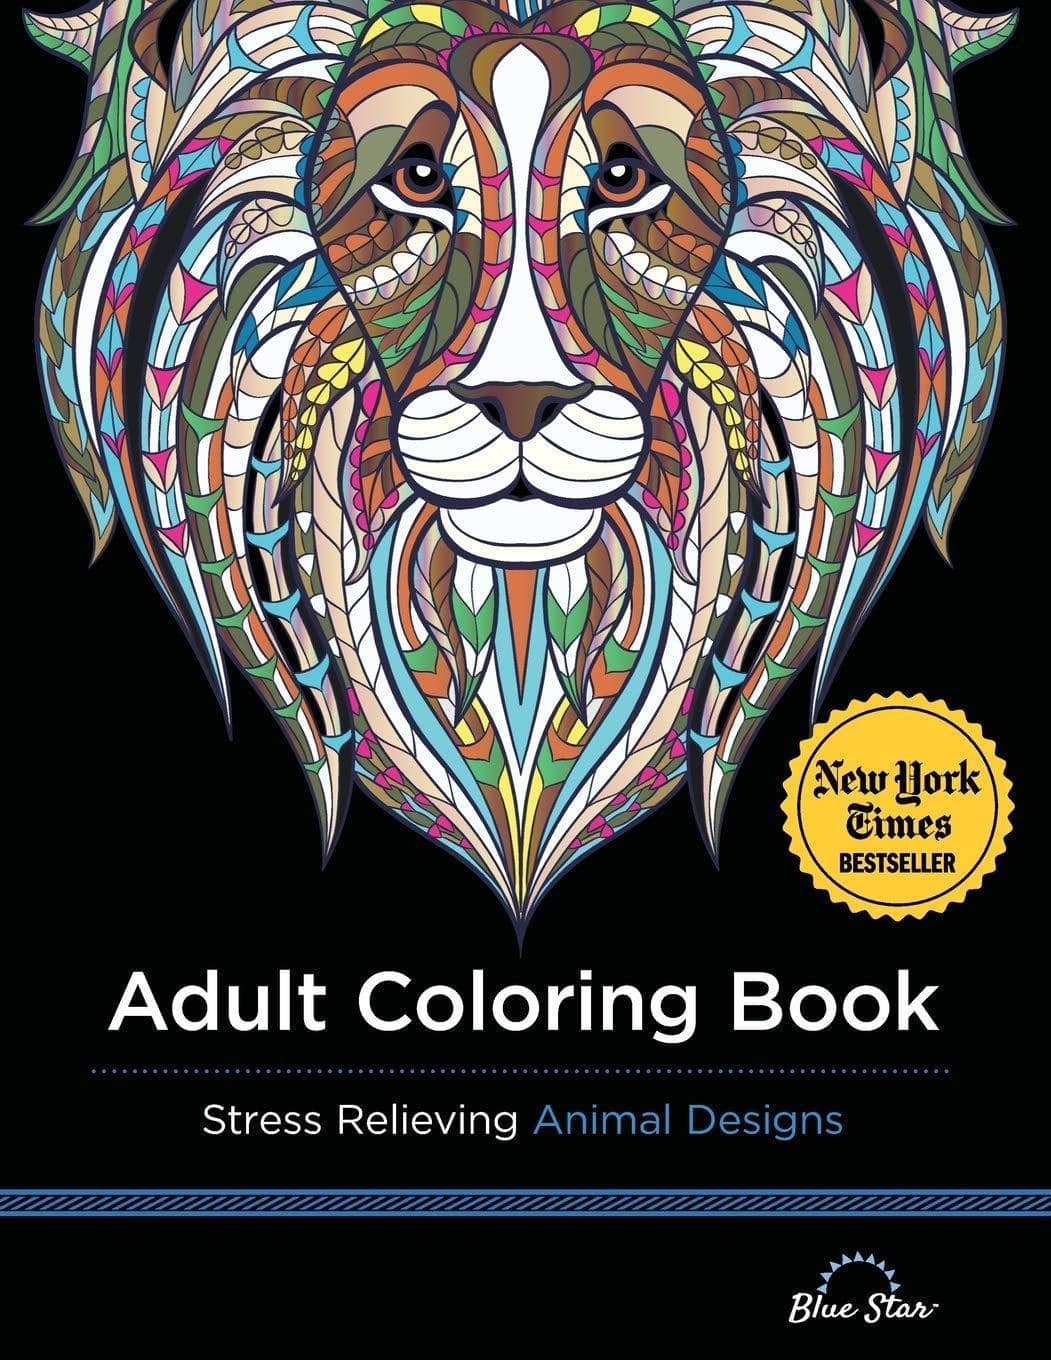 Adult Coloring Book: Stress Relieving Animal Designs - SureShot Books Publishing LLC